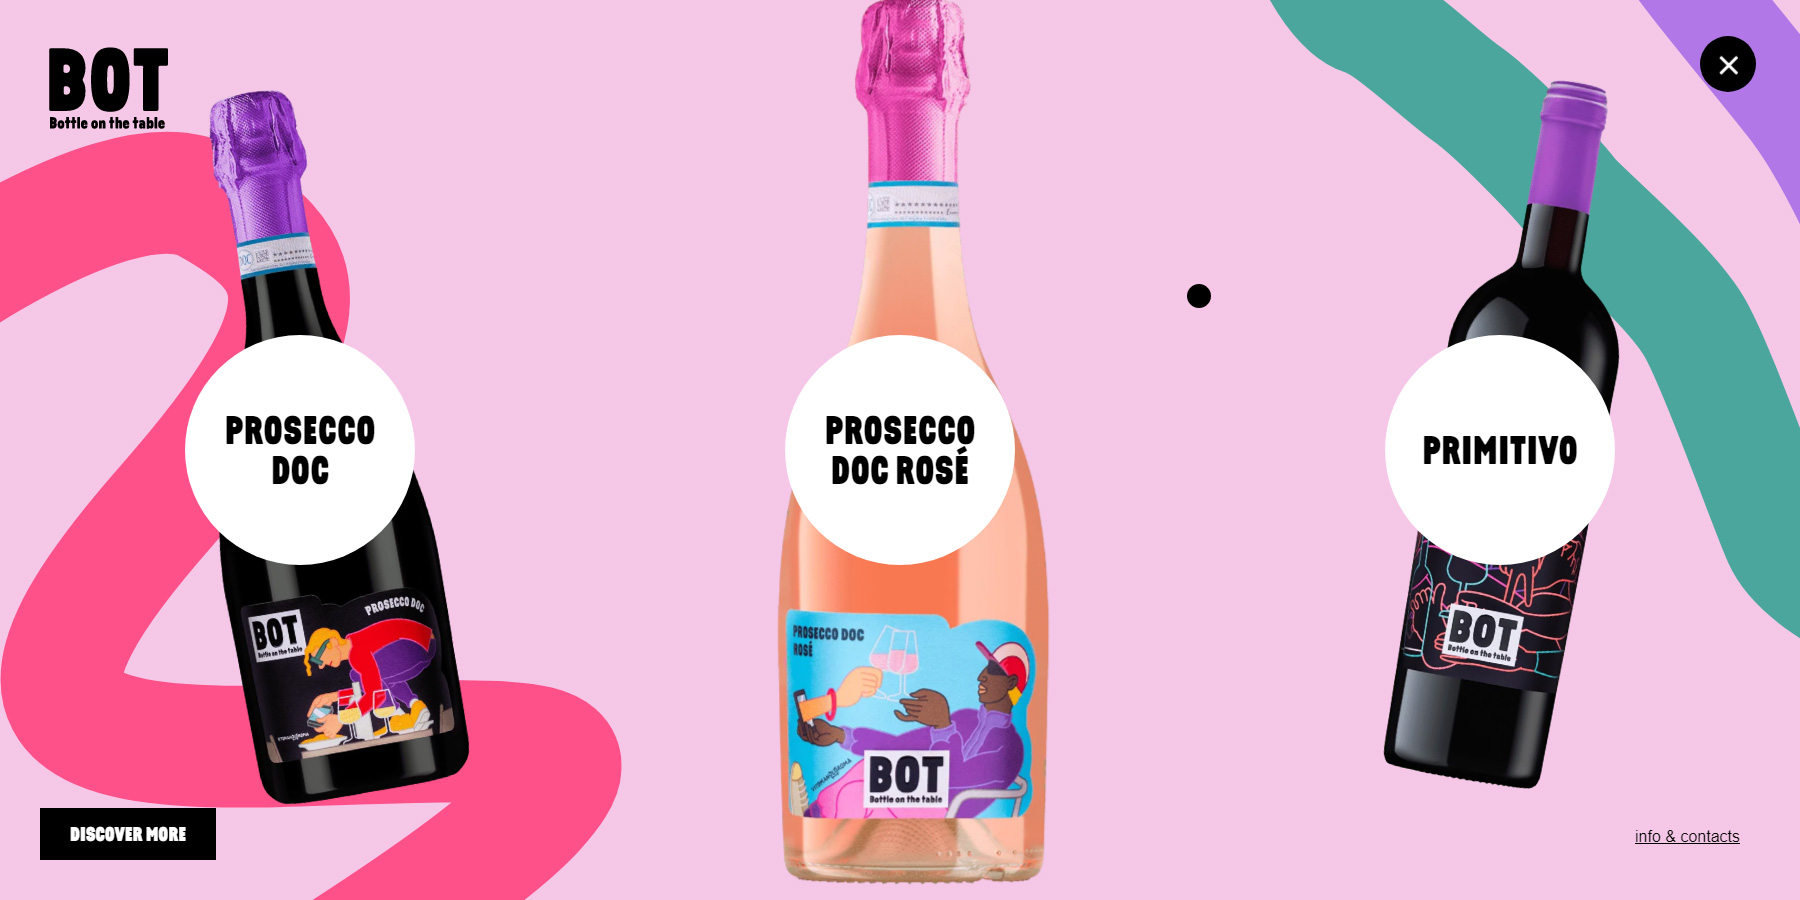 BOT - Bottle on the table - Website of the Day